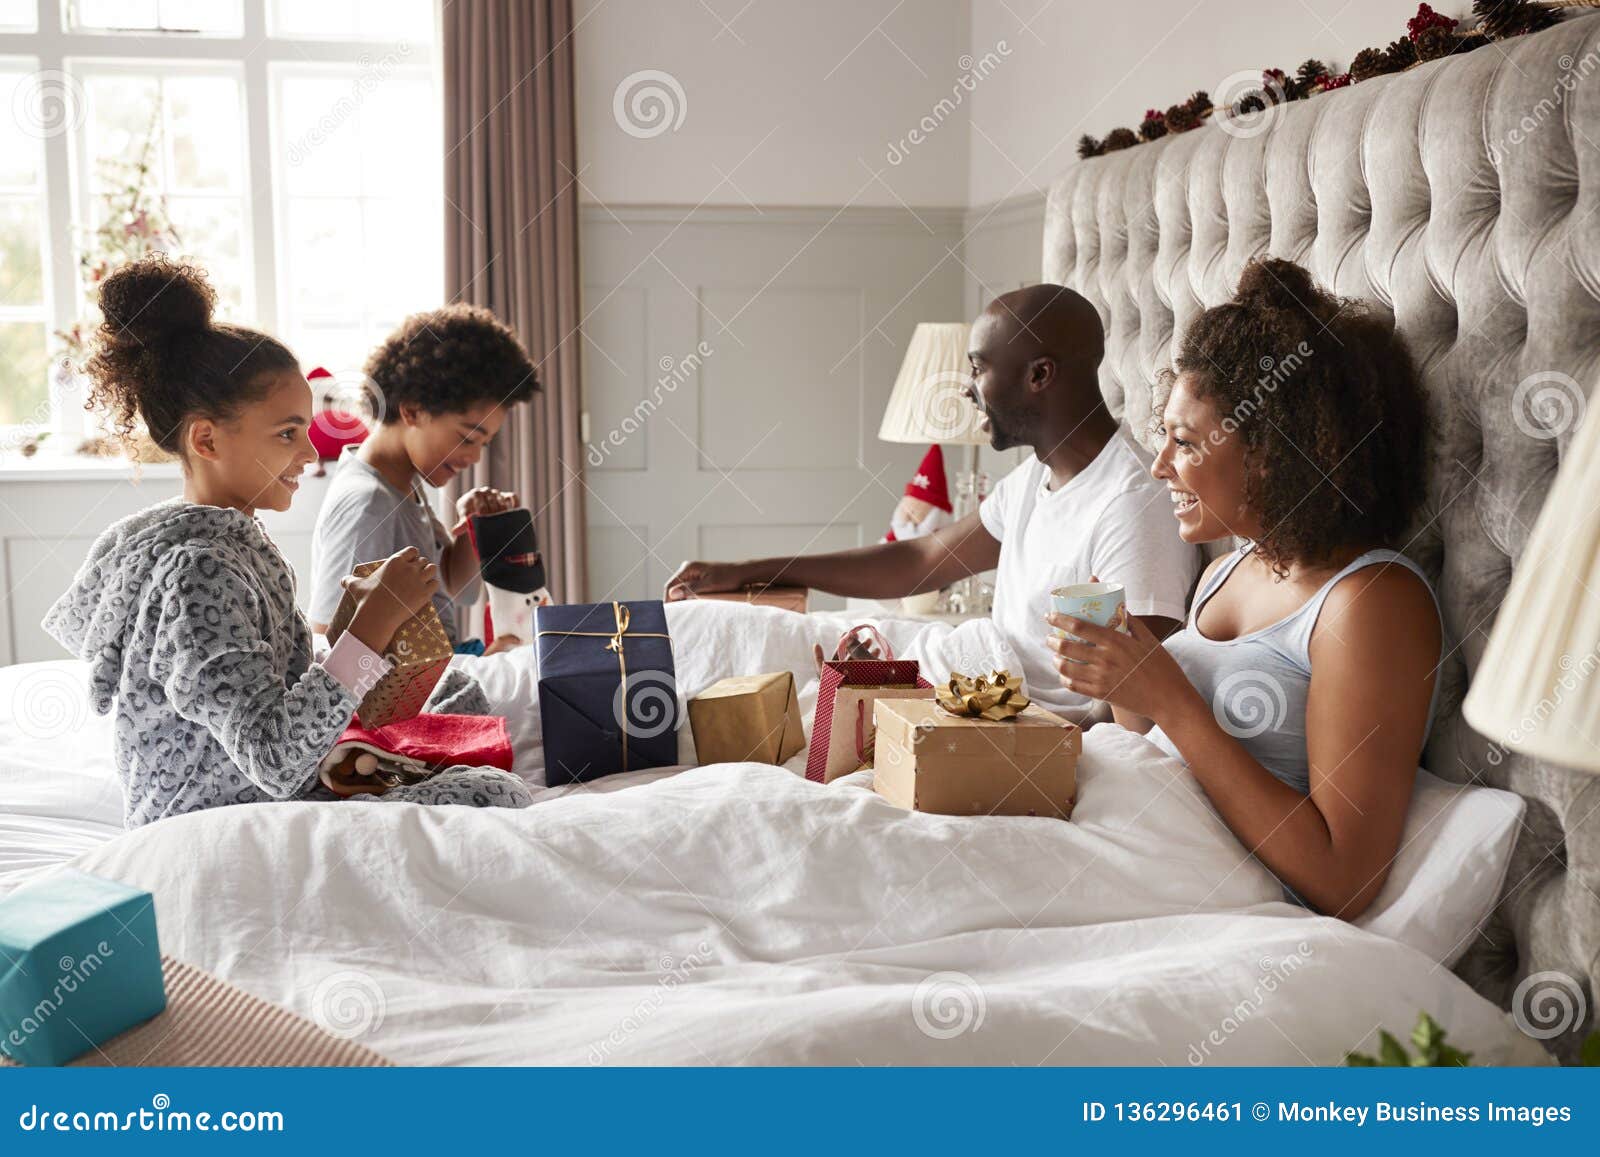 Young Kids Opening Gifts on Parentsï¿½ Bed on Christmas Morning while ...